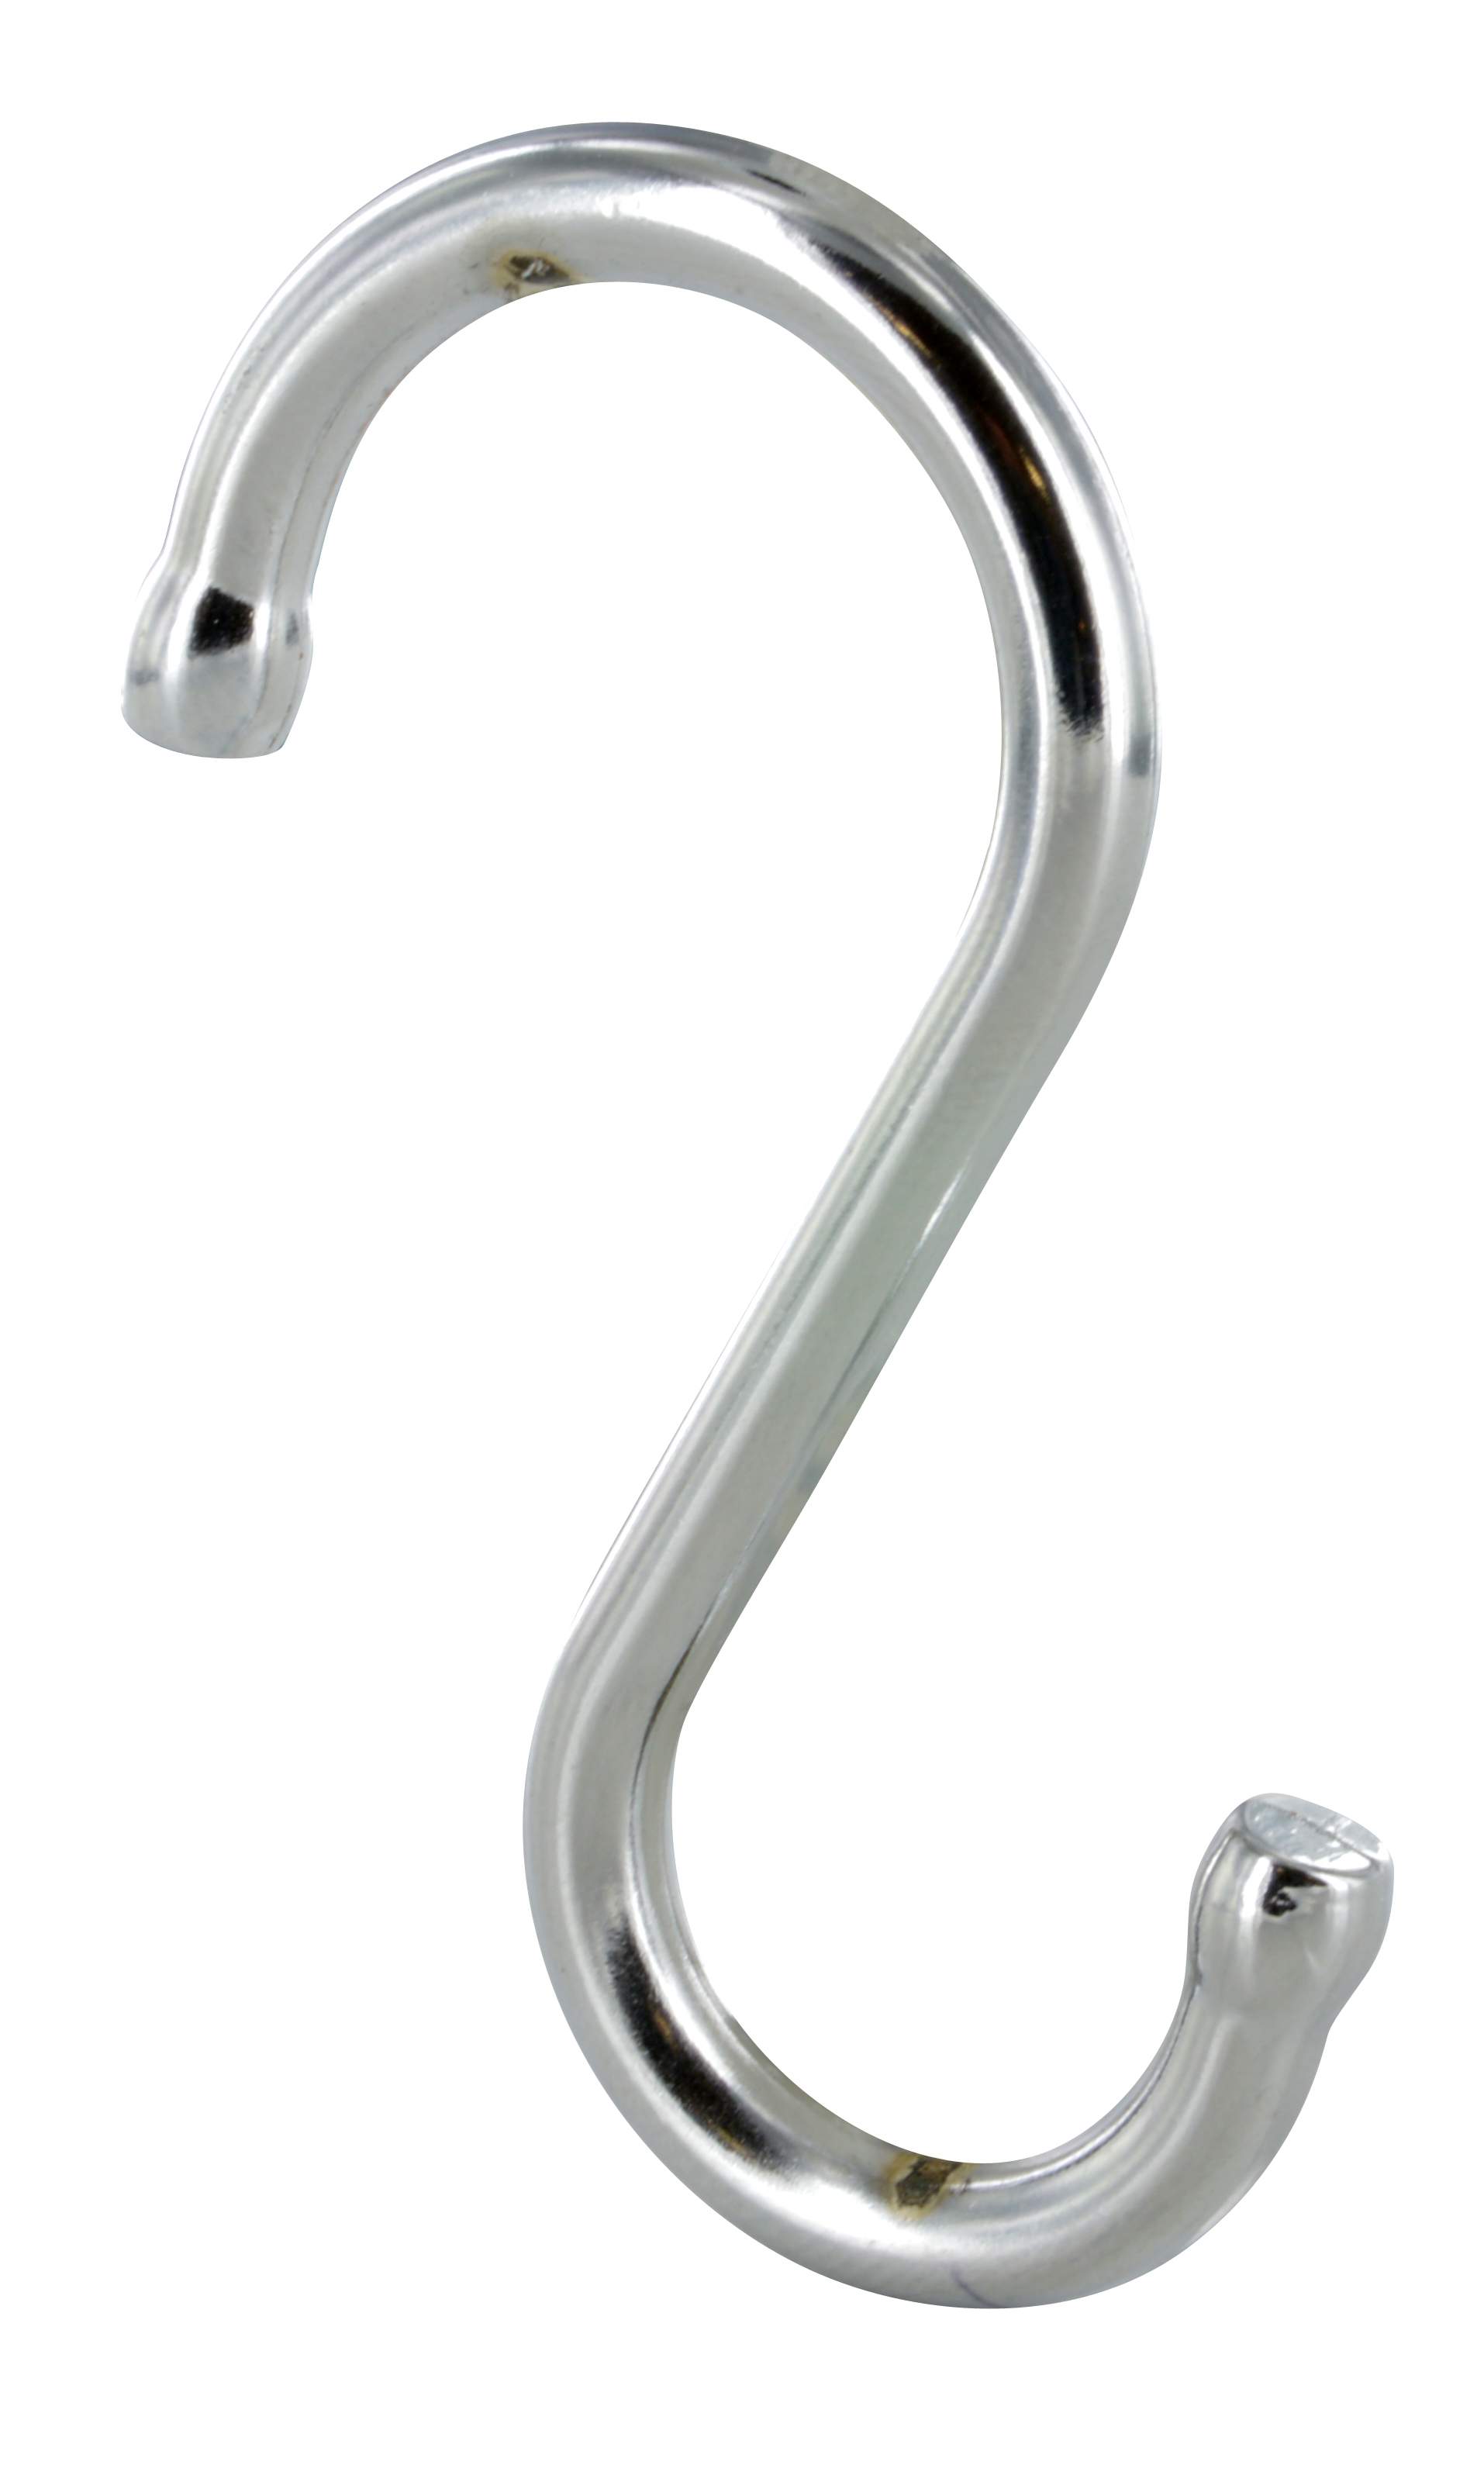 Credenza hook, H.70mm, W.4mm, chrome-plated steel, 3 pcs. 